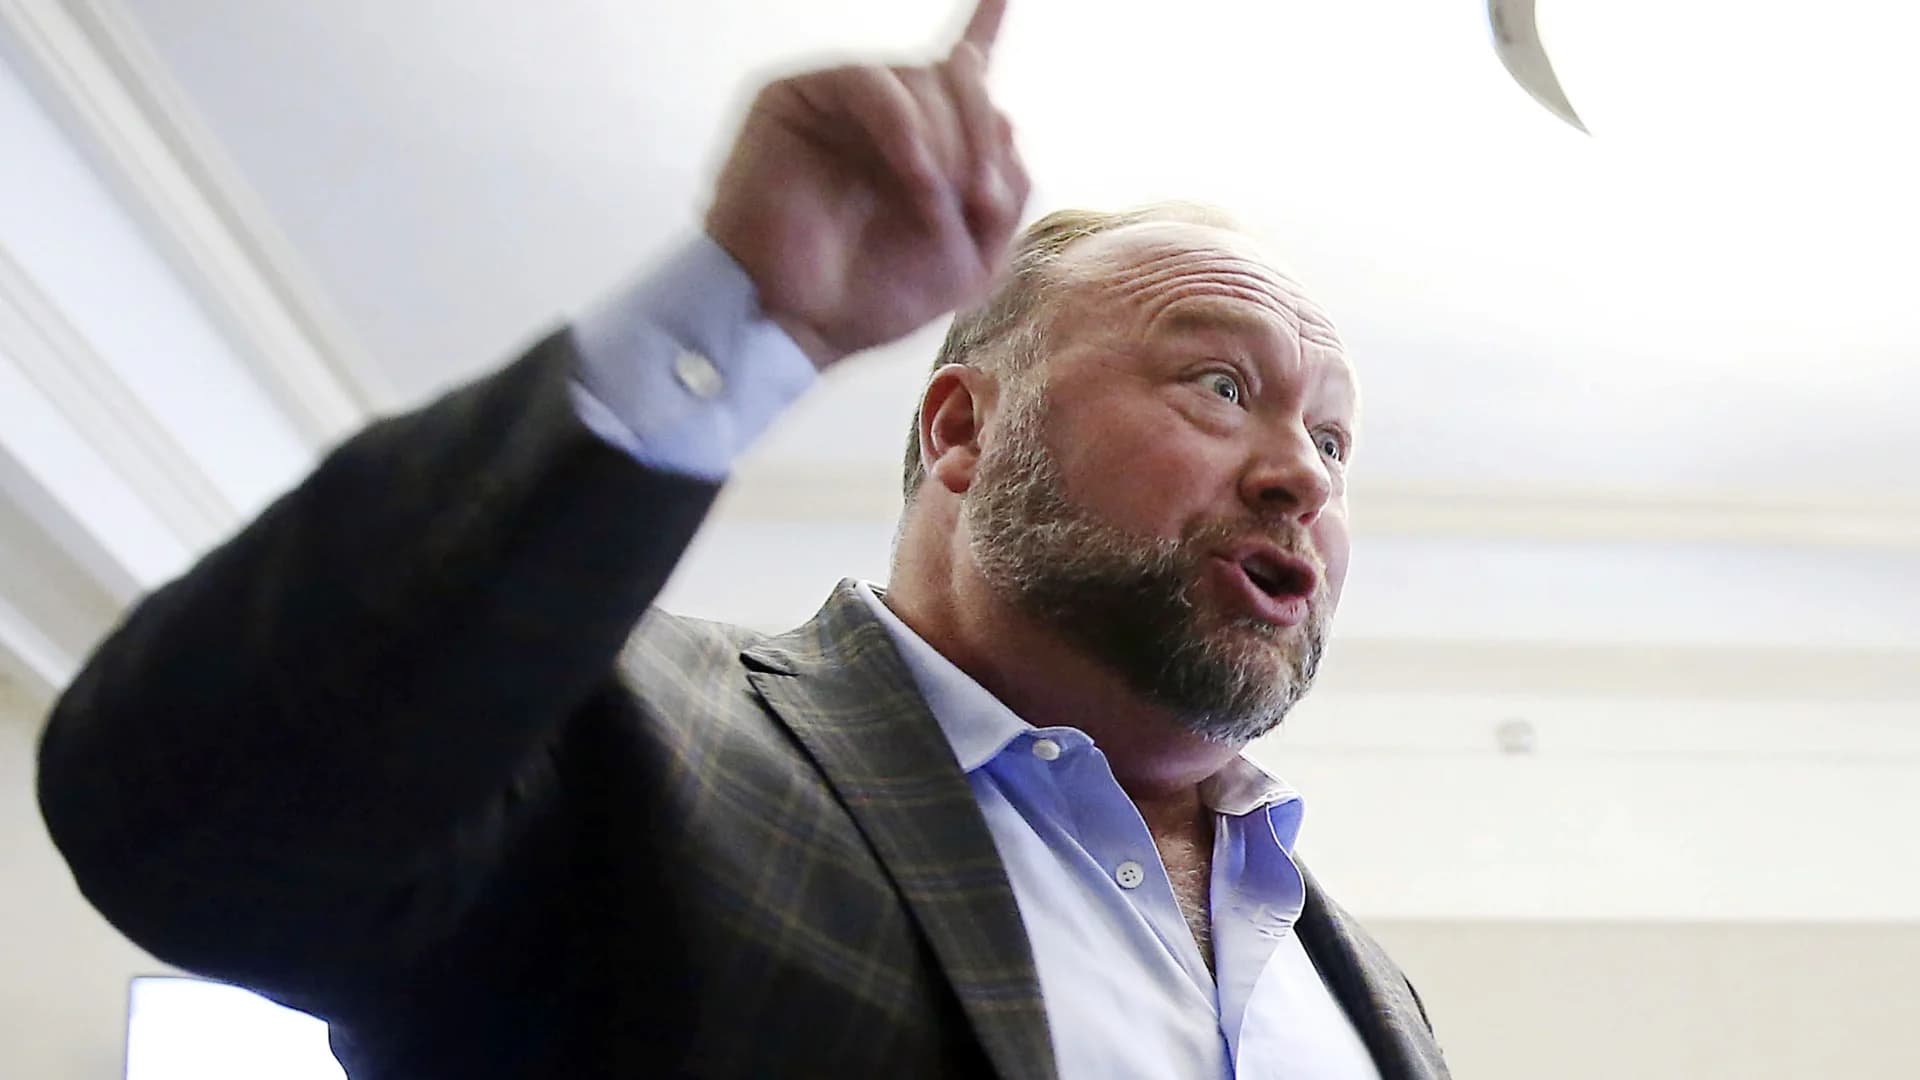 Alex Jones' lawyer faces disciplinary hearing in Connecticut